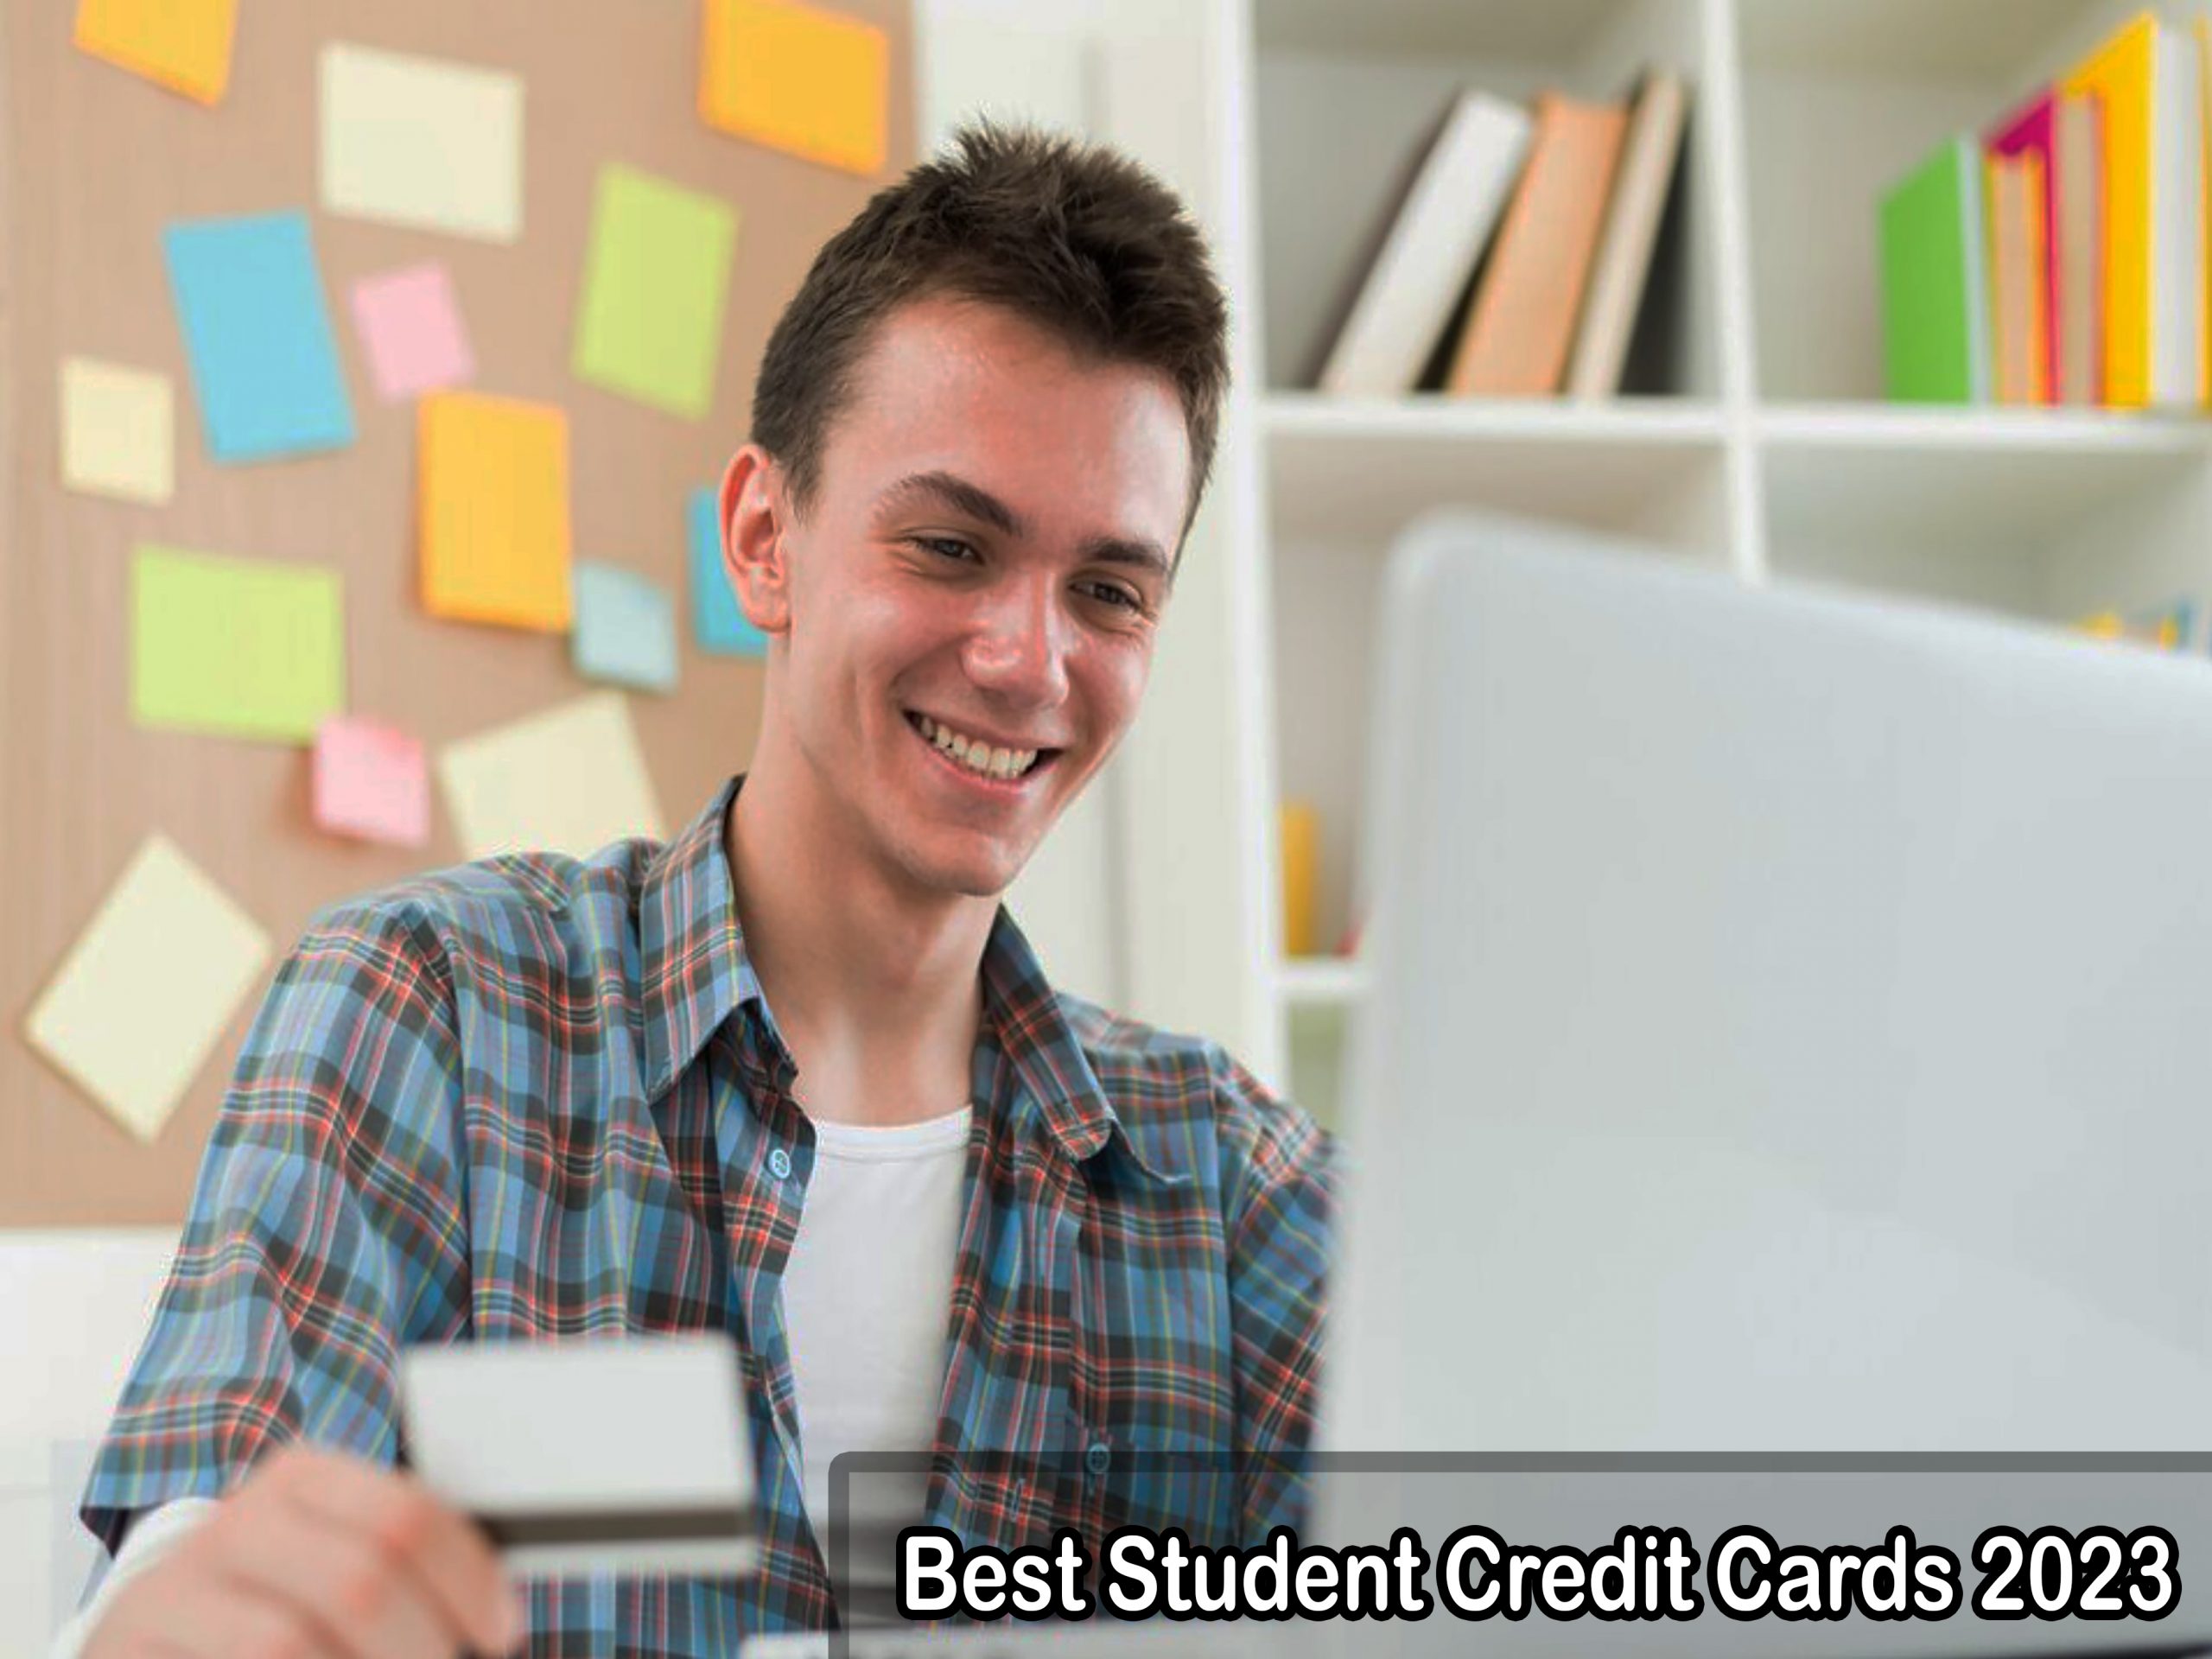 Best Student Credit Cards 2023 - Students in higher education are at a turning point. Credit is the fundamental cornerstone of a stable financial future, yet it can be challenging to establish.